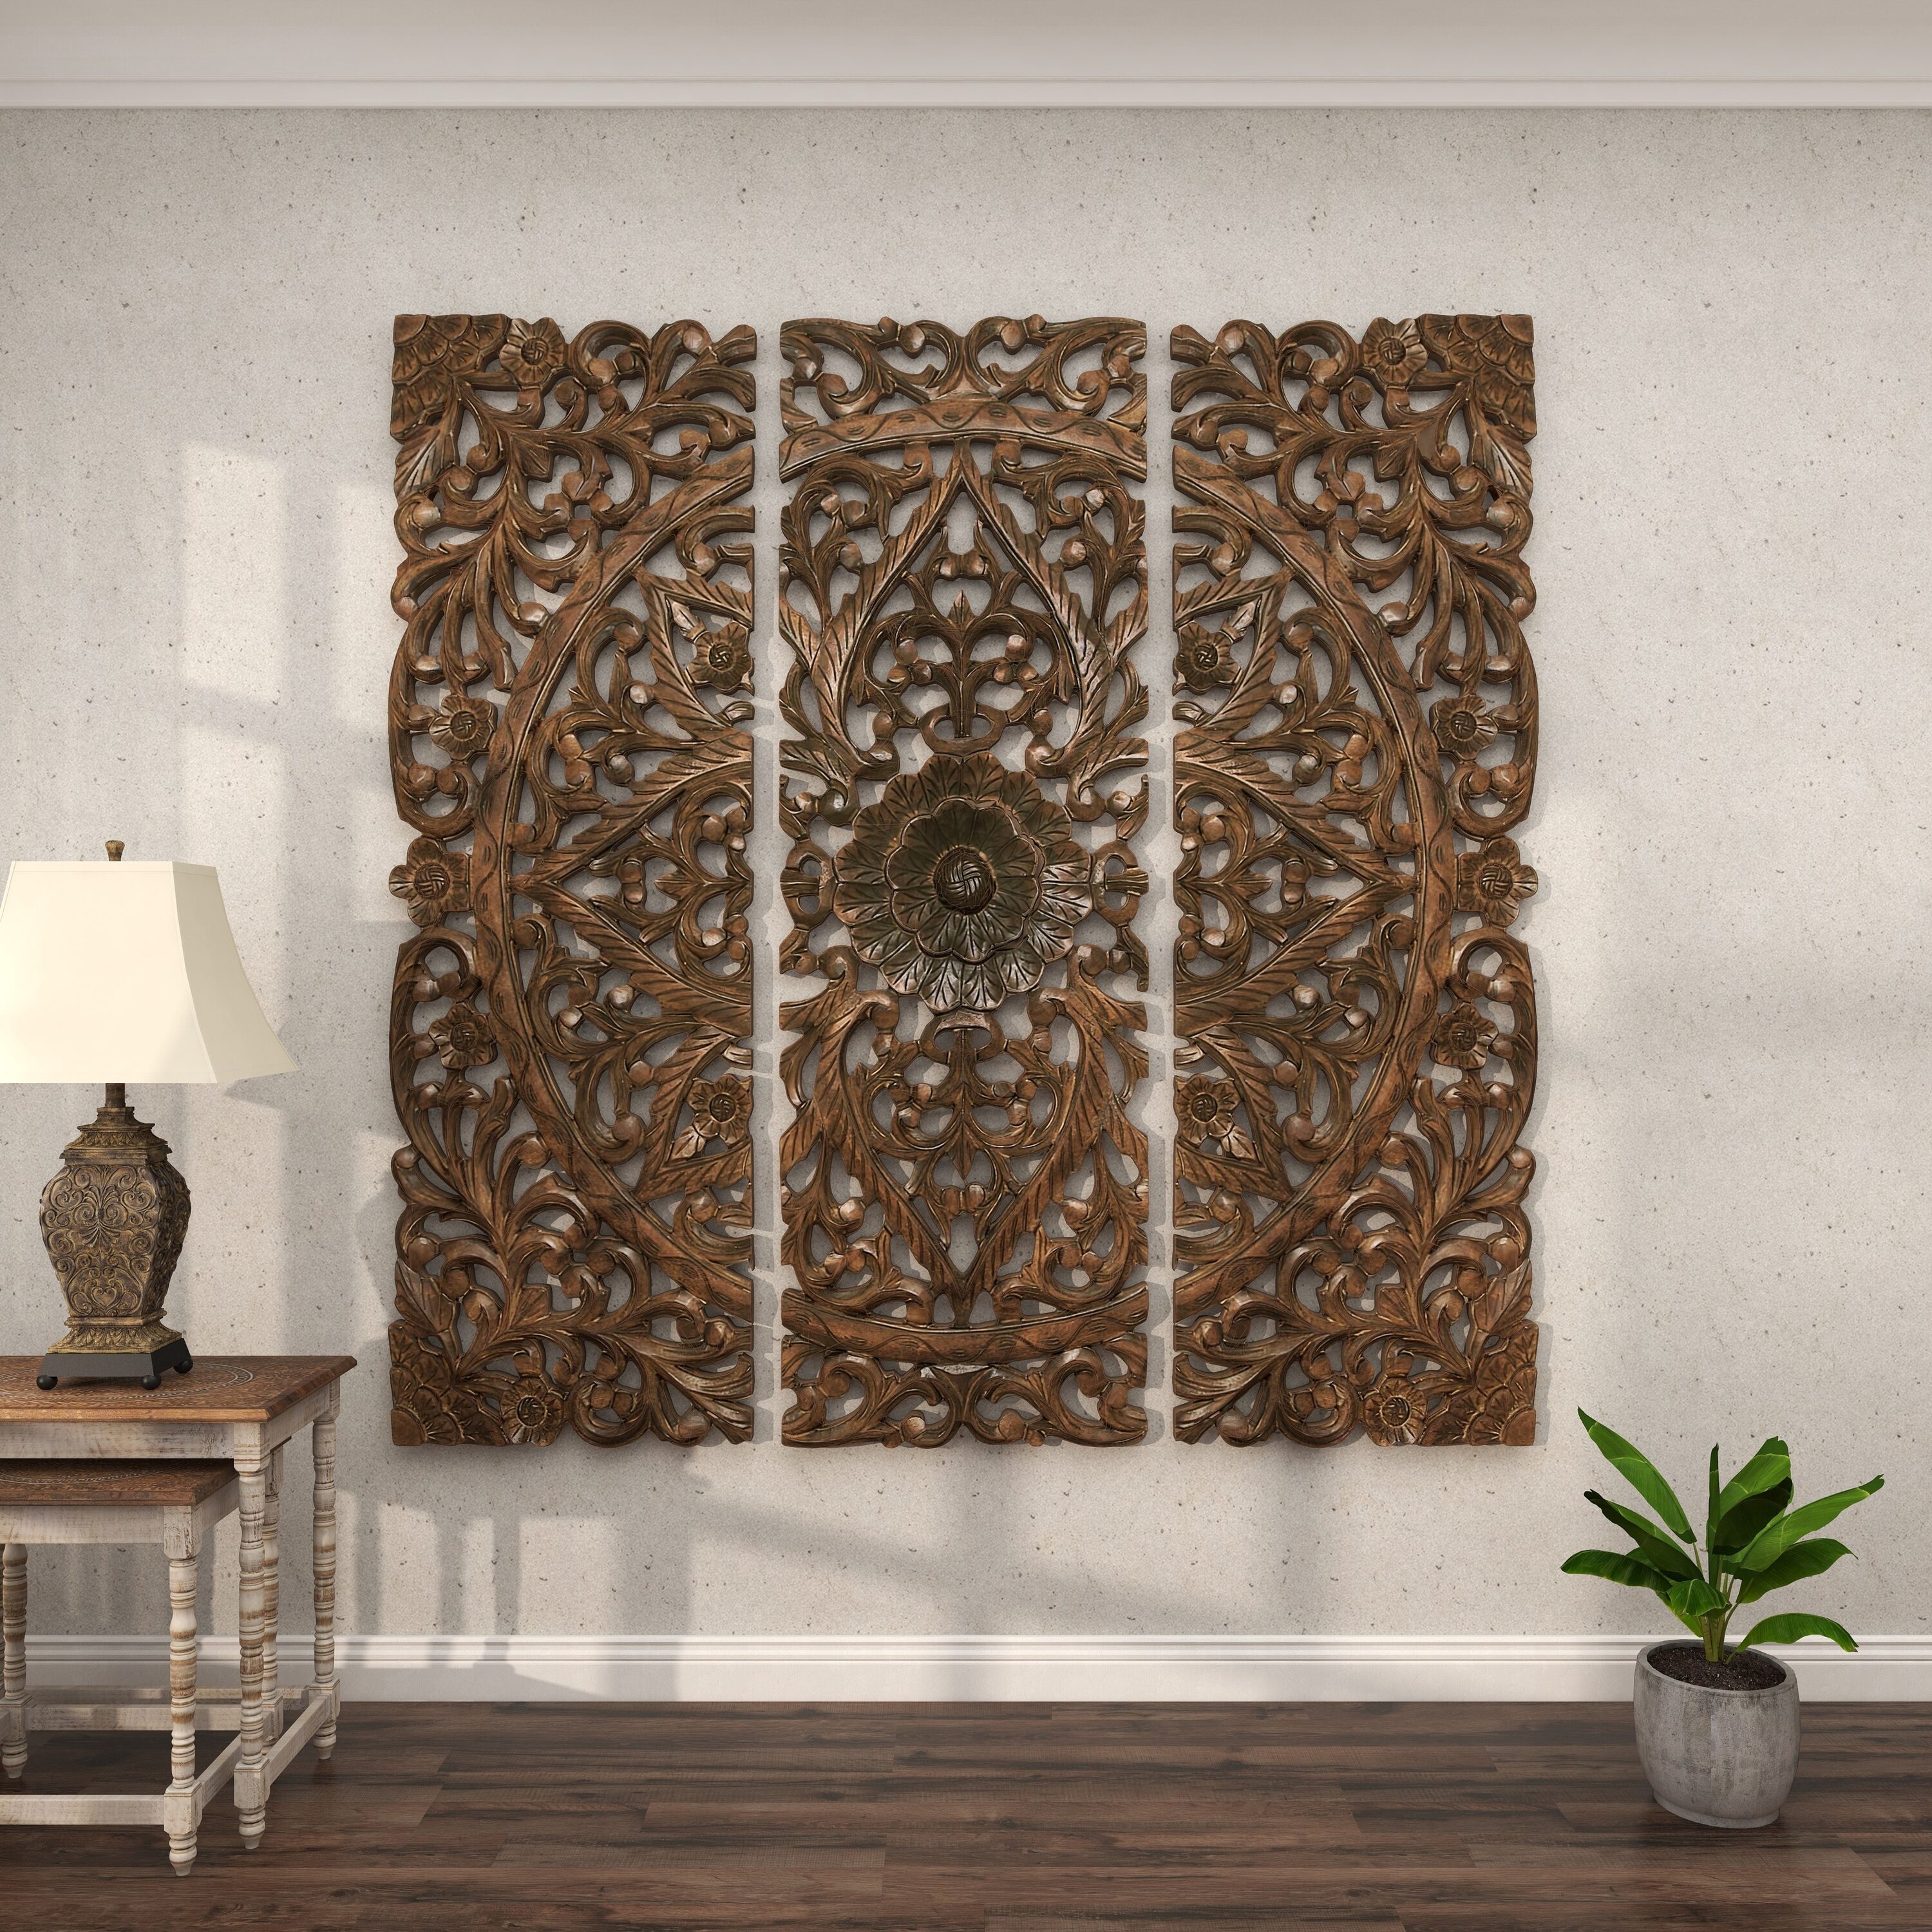 High-Quality wood painting panels for Decoration and More 